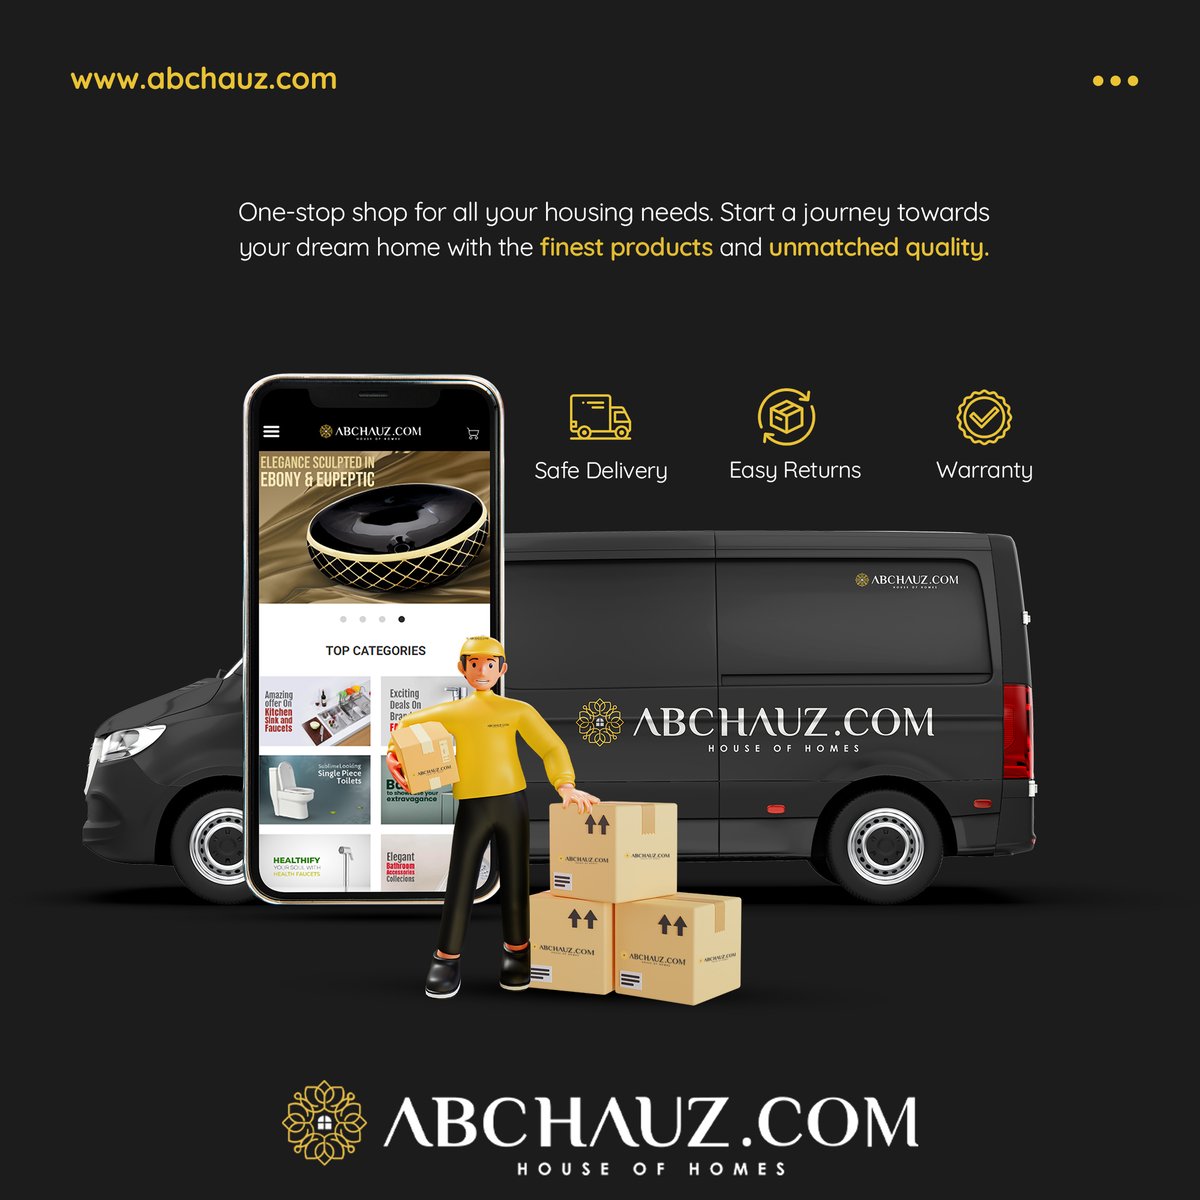 Check out our online store for building materials! 
Visit now and make your shopping easier.

#abchauzindia #ABCGroup #eCommerceWebsite #ecommercestore #Startup #ecommercestartup #buildingmaterials #bathroomfittings #homeconstruction